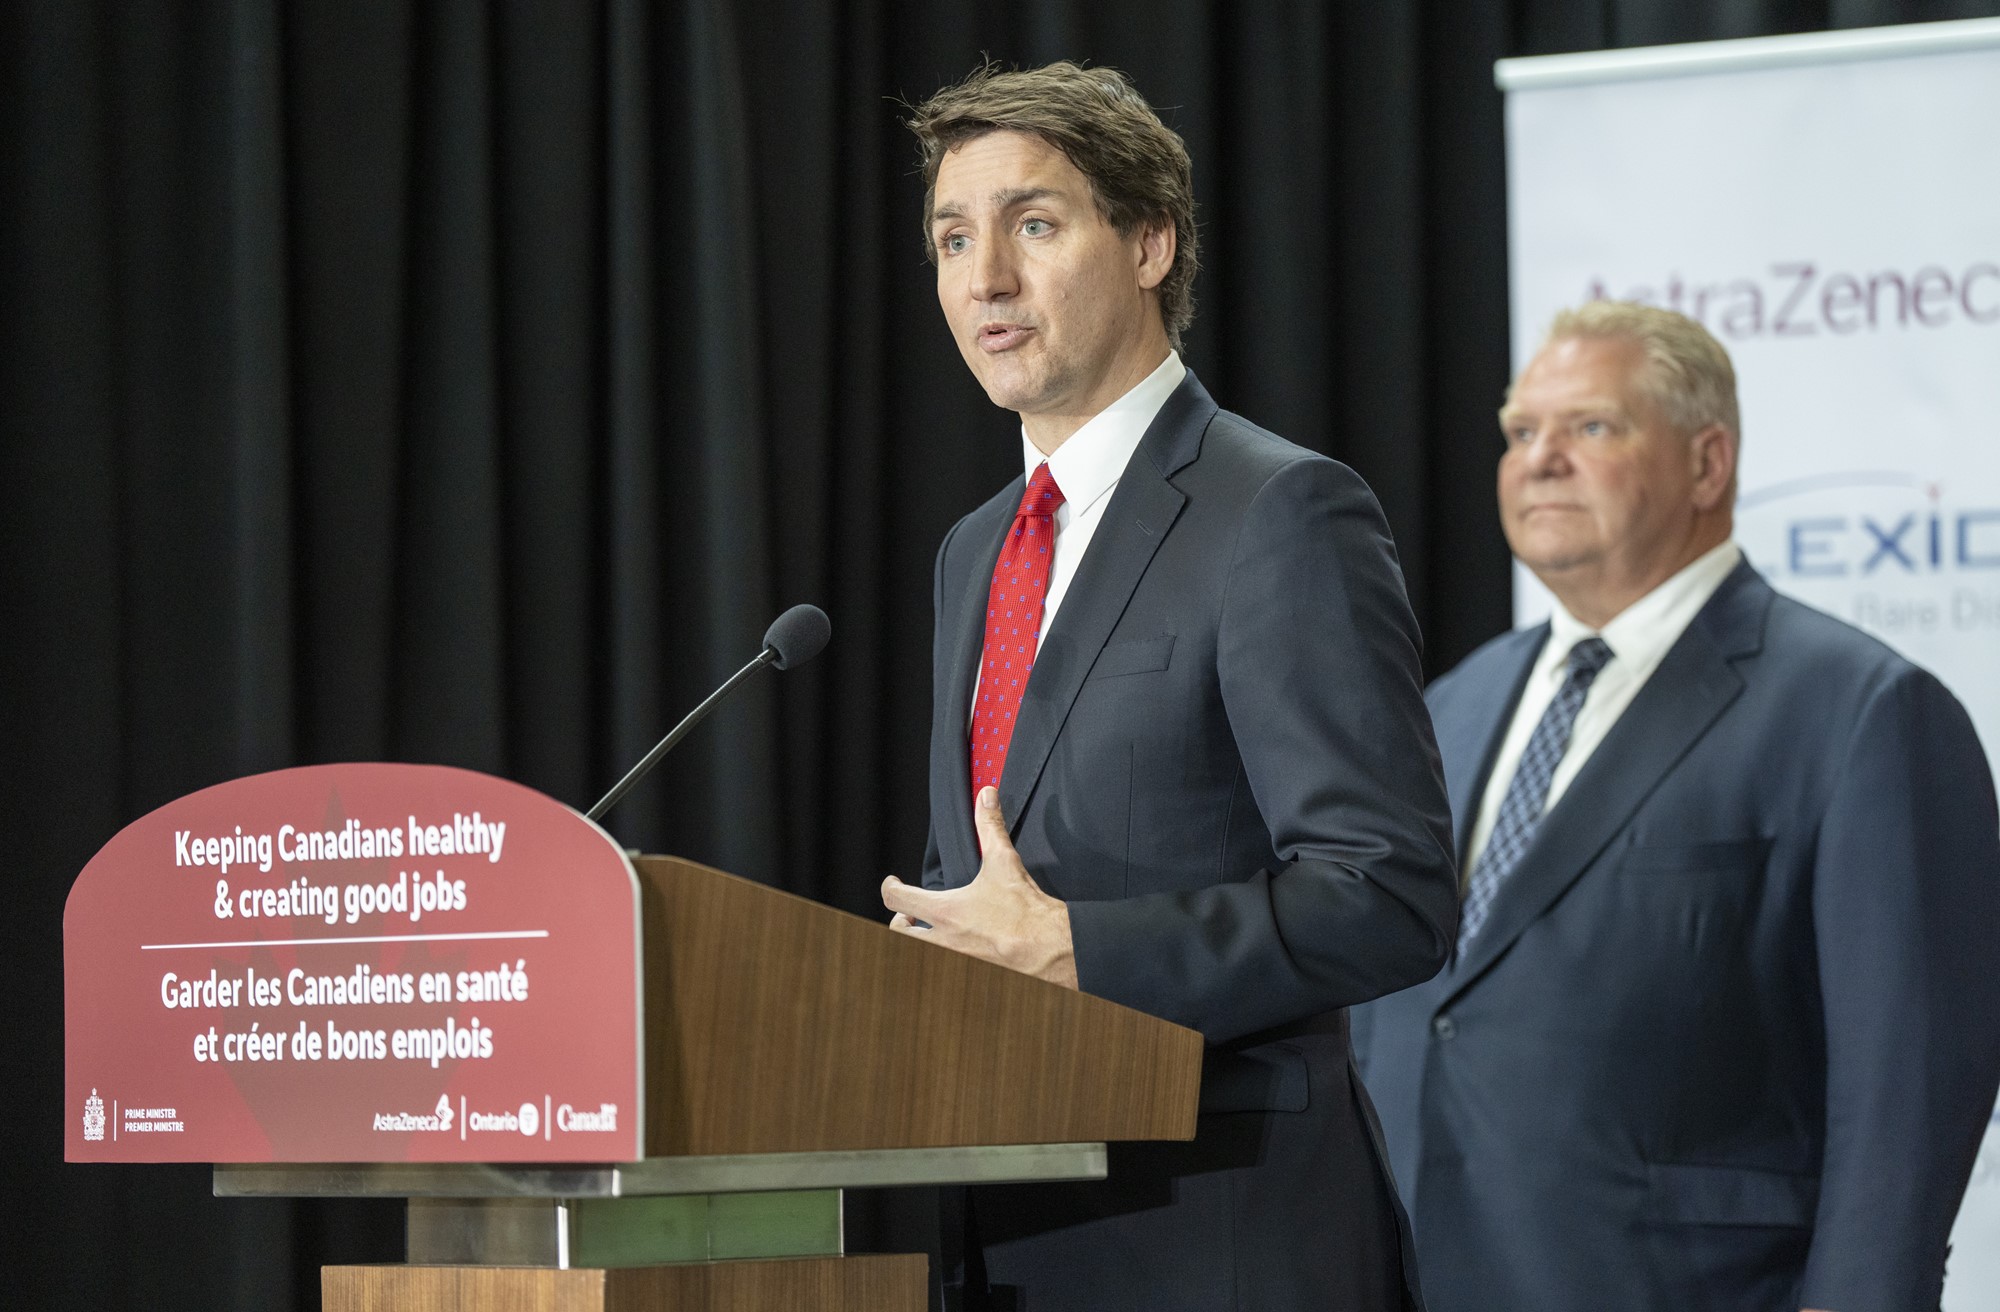 Justin Trudeau stands at a podium speaking as a person in a suit stands behind in the background.